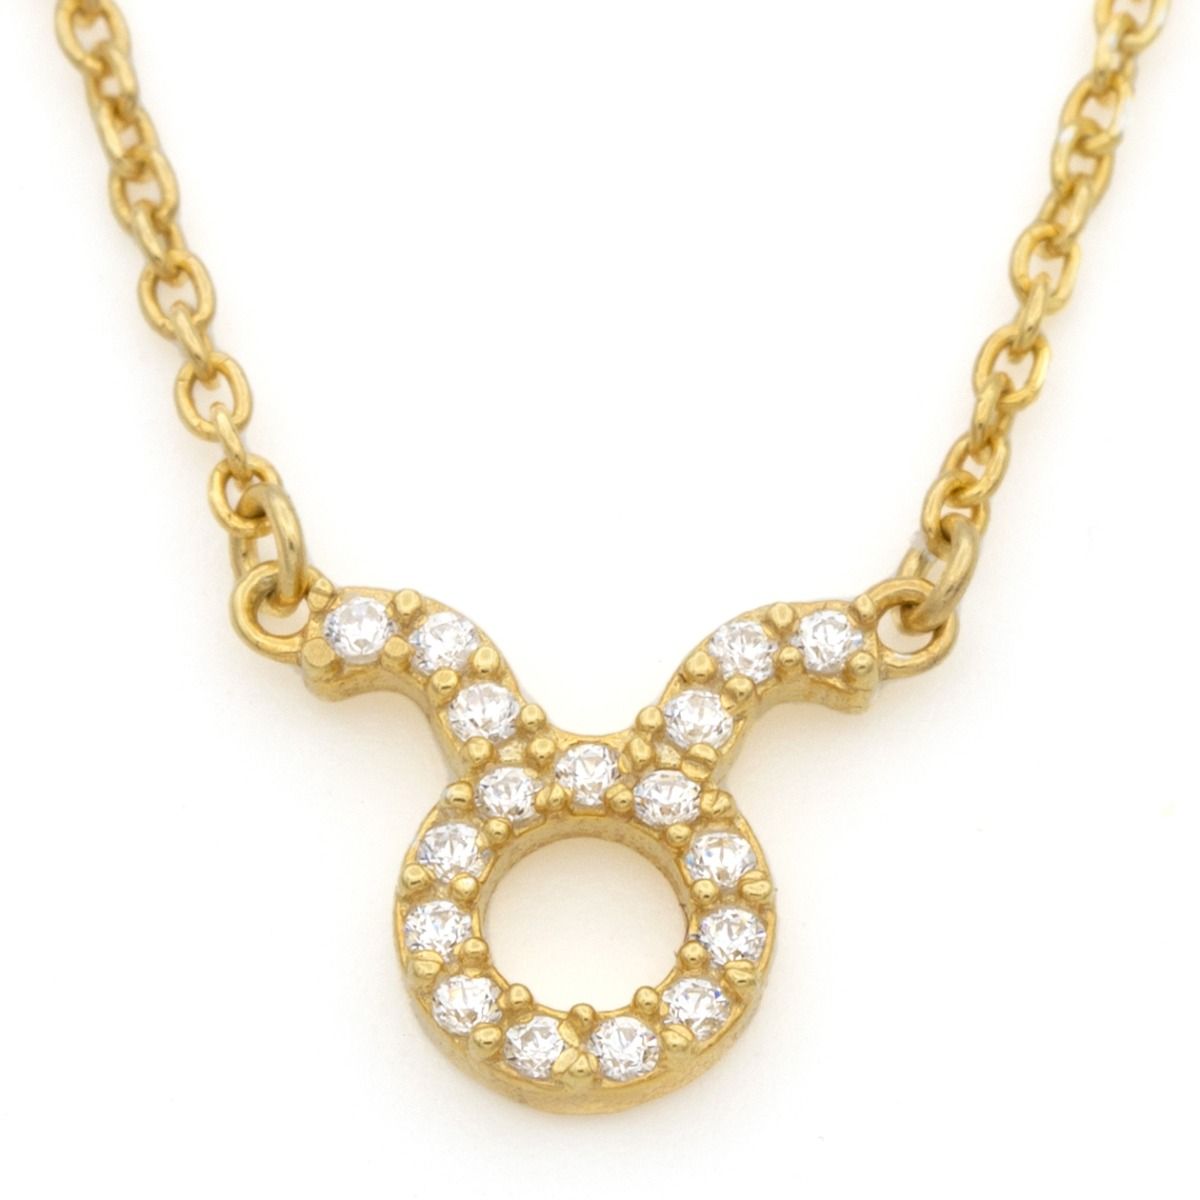 Taurus Vermeil) Necklace with Sign (Gold Rolo Talisa Diamonds - Zodiac - Chain